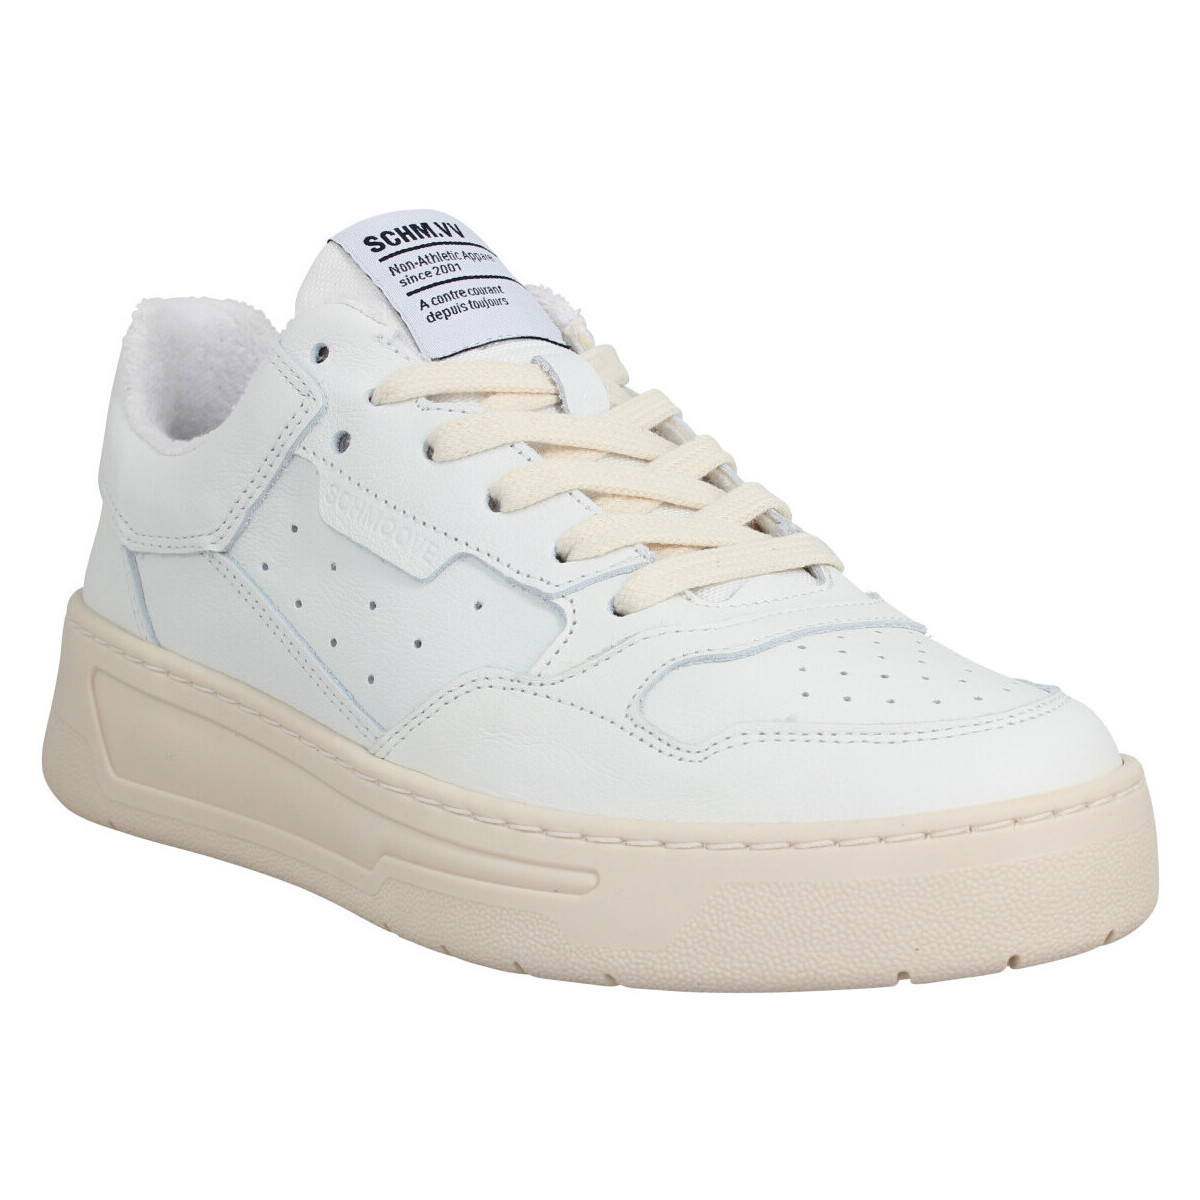 Sneakers Schmoove Smatch New Trainer Cuir Femme Blanc